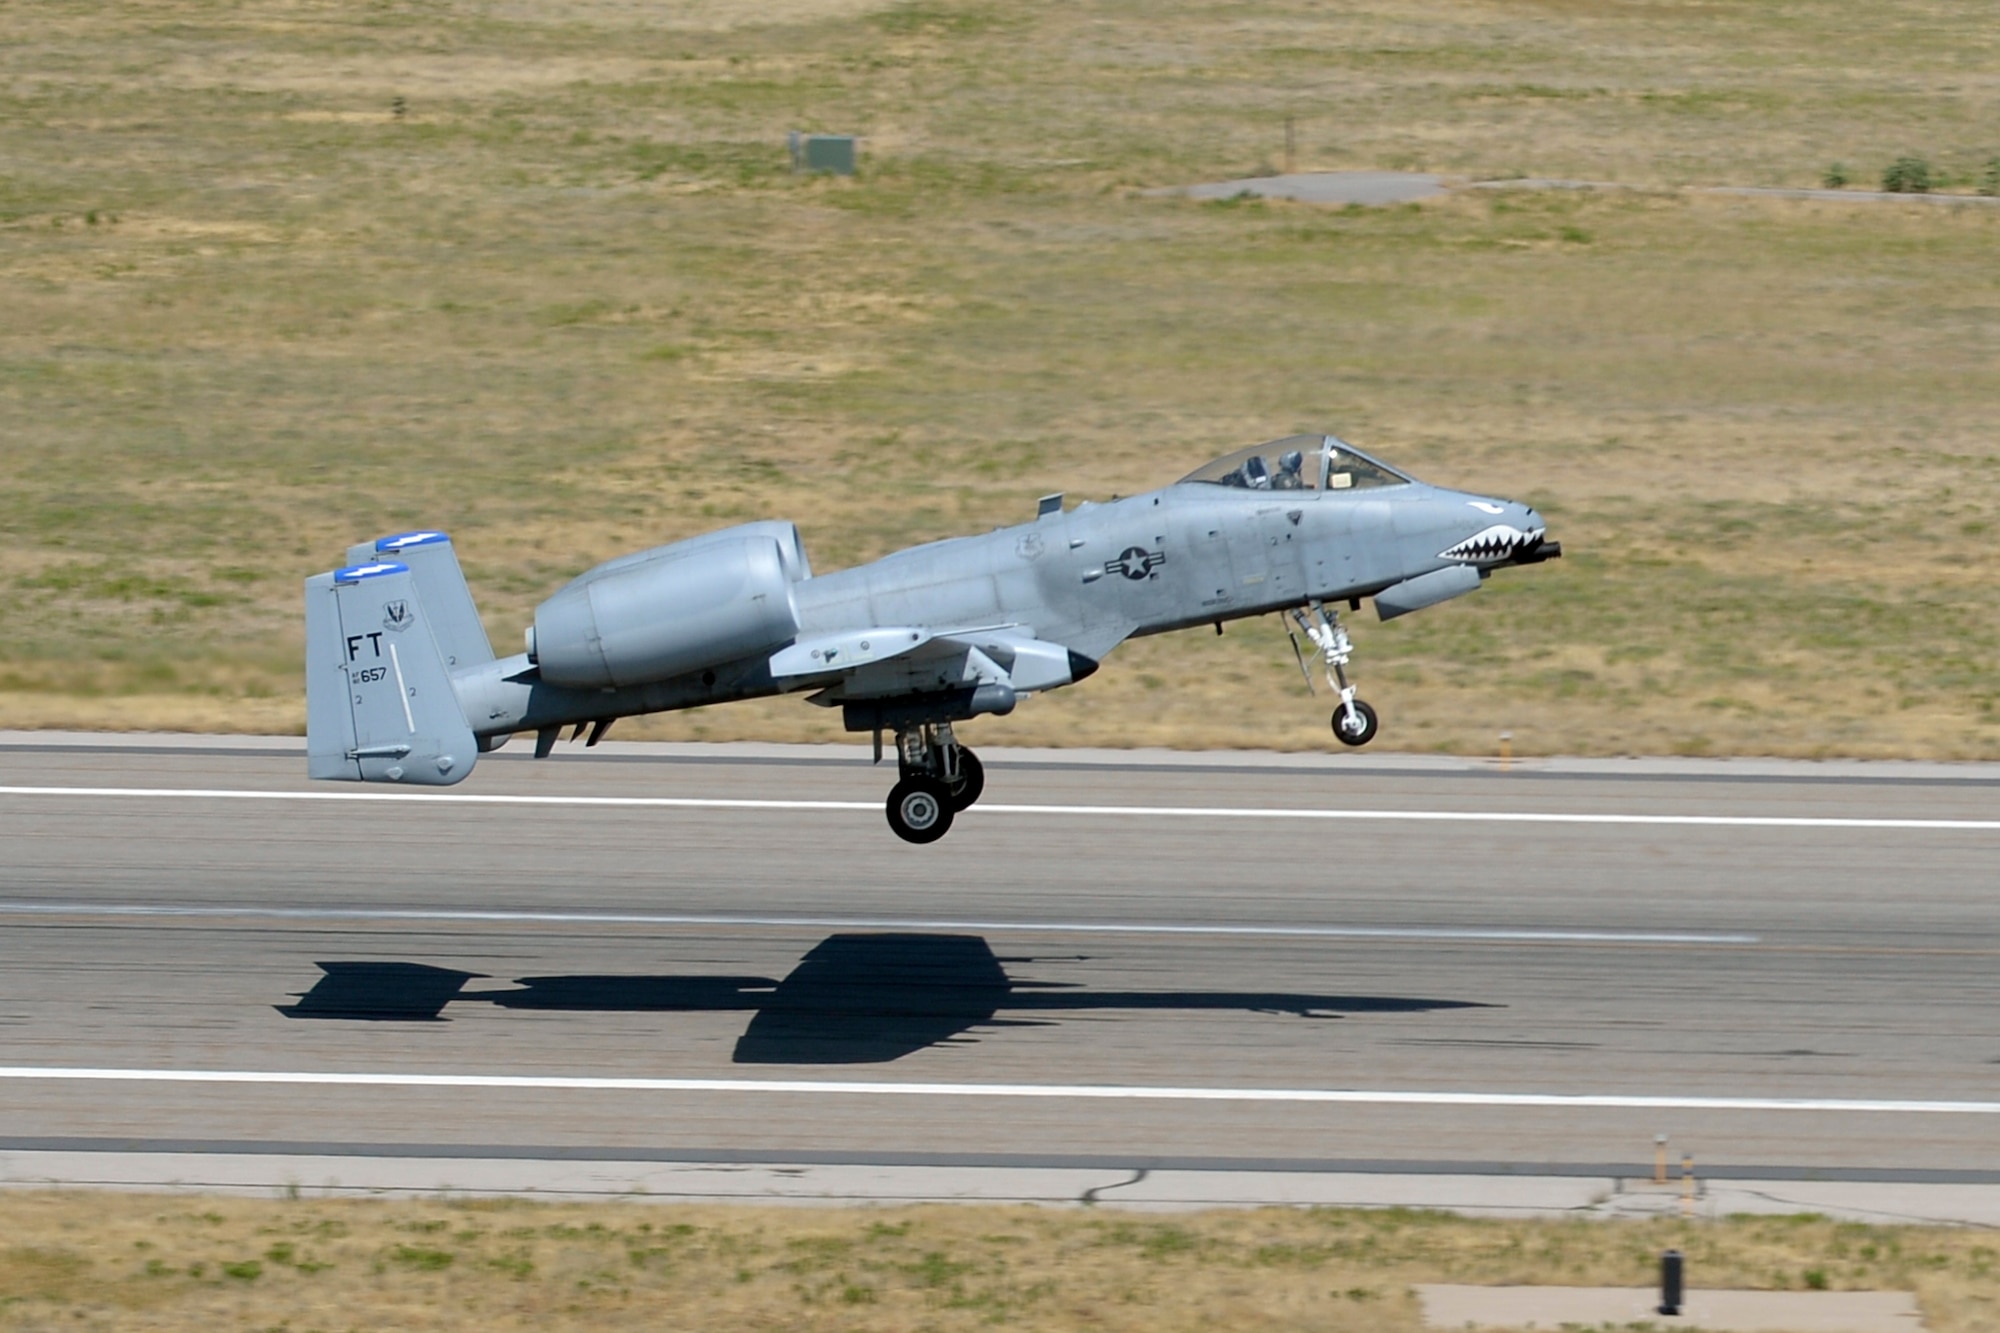 An A-10 Thunderbolt II aircraft from Moody Air Force Base, Ga., takes off from Hill AFB, Aug. 2. Aircraft from Moody are participating in an exercise know as Combat Hammer at Hill and the Utah Test and Training Range. (U.S. Air Force photo by Todd Cromar)